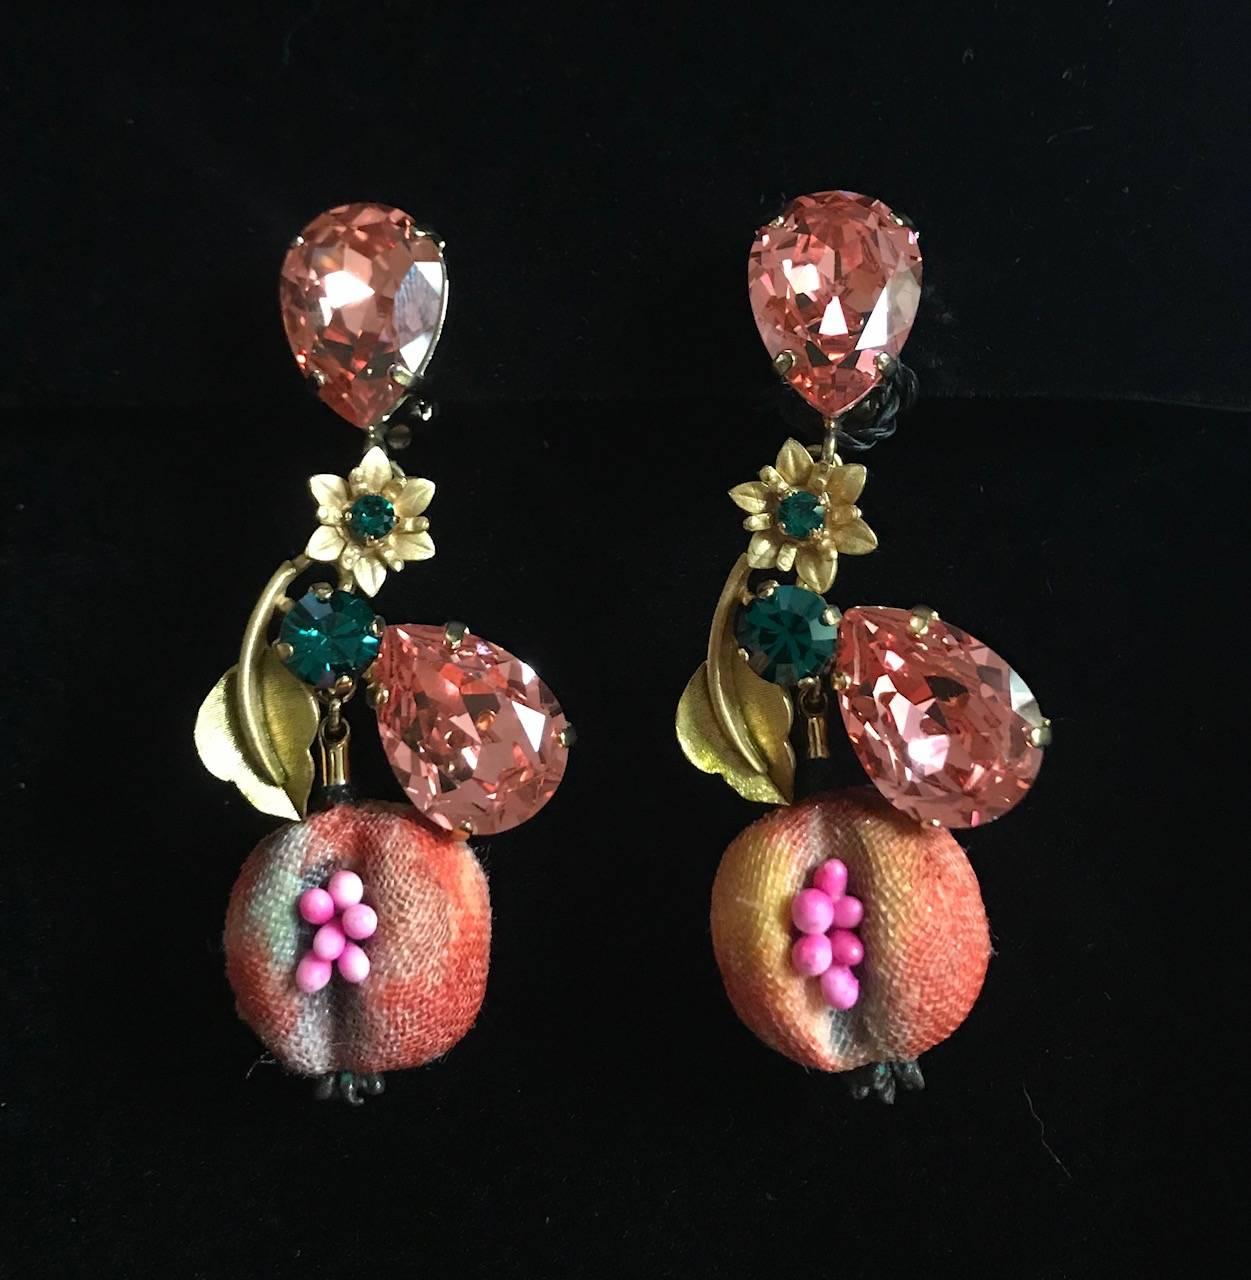 Dolce & Gabbana gold tone clip on earrings with cloth covered pomegranates featuring tiny seeds and pink and green crystal accents, along with a tiny gold flower and leaf. 

Approximately 3